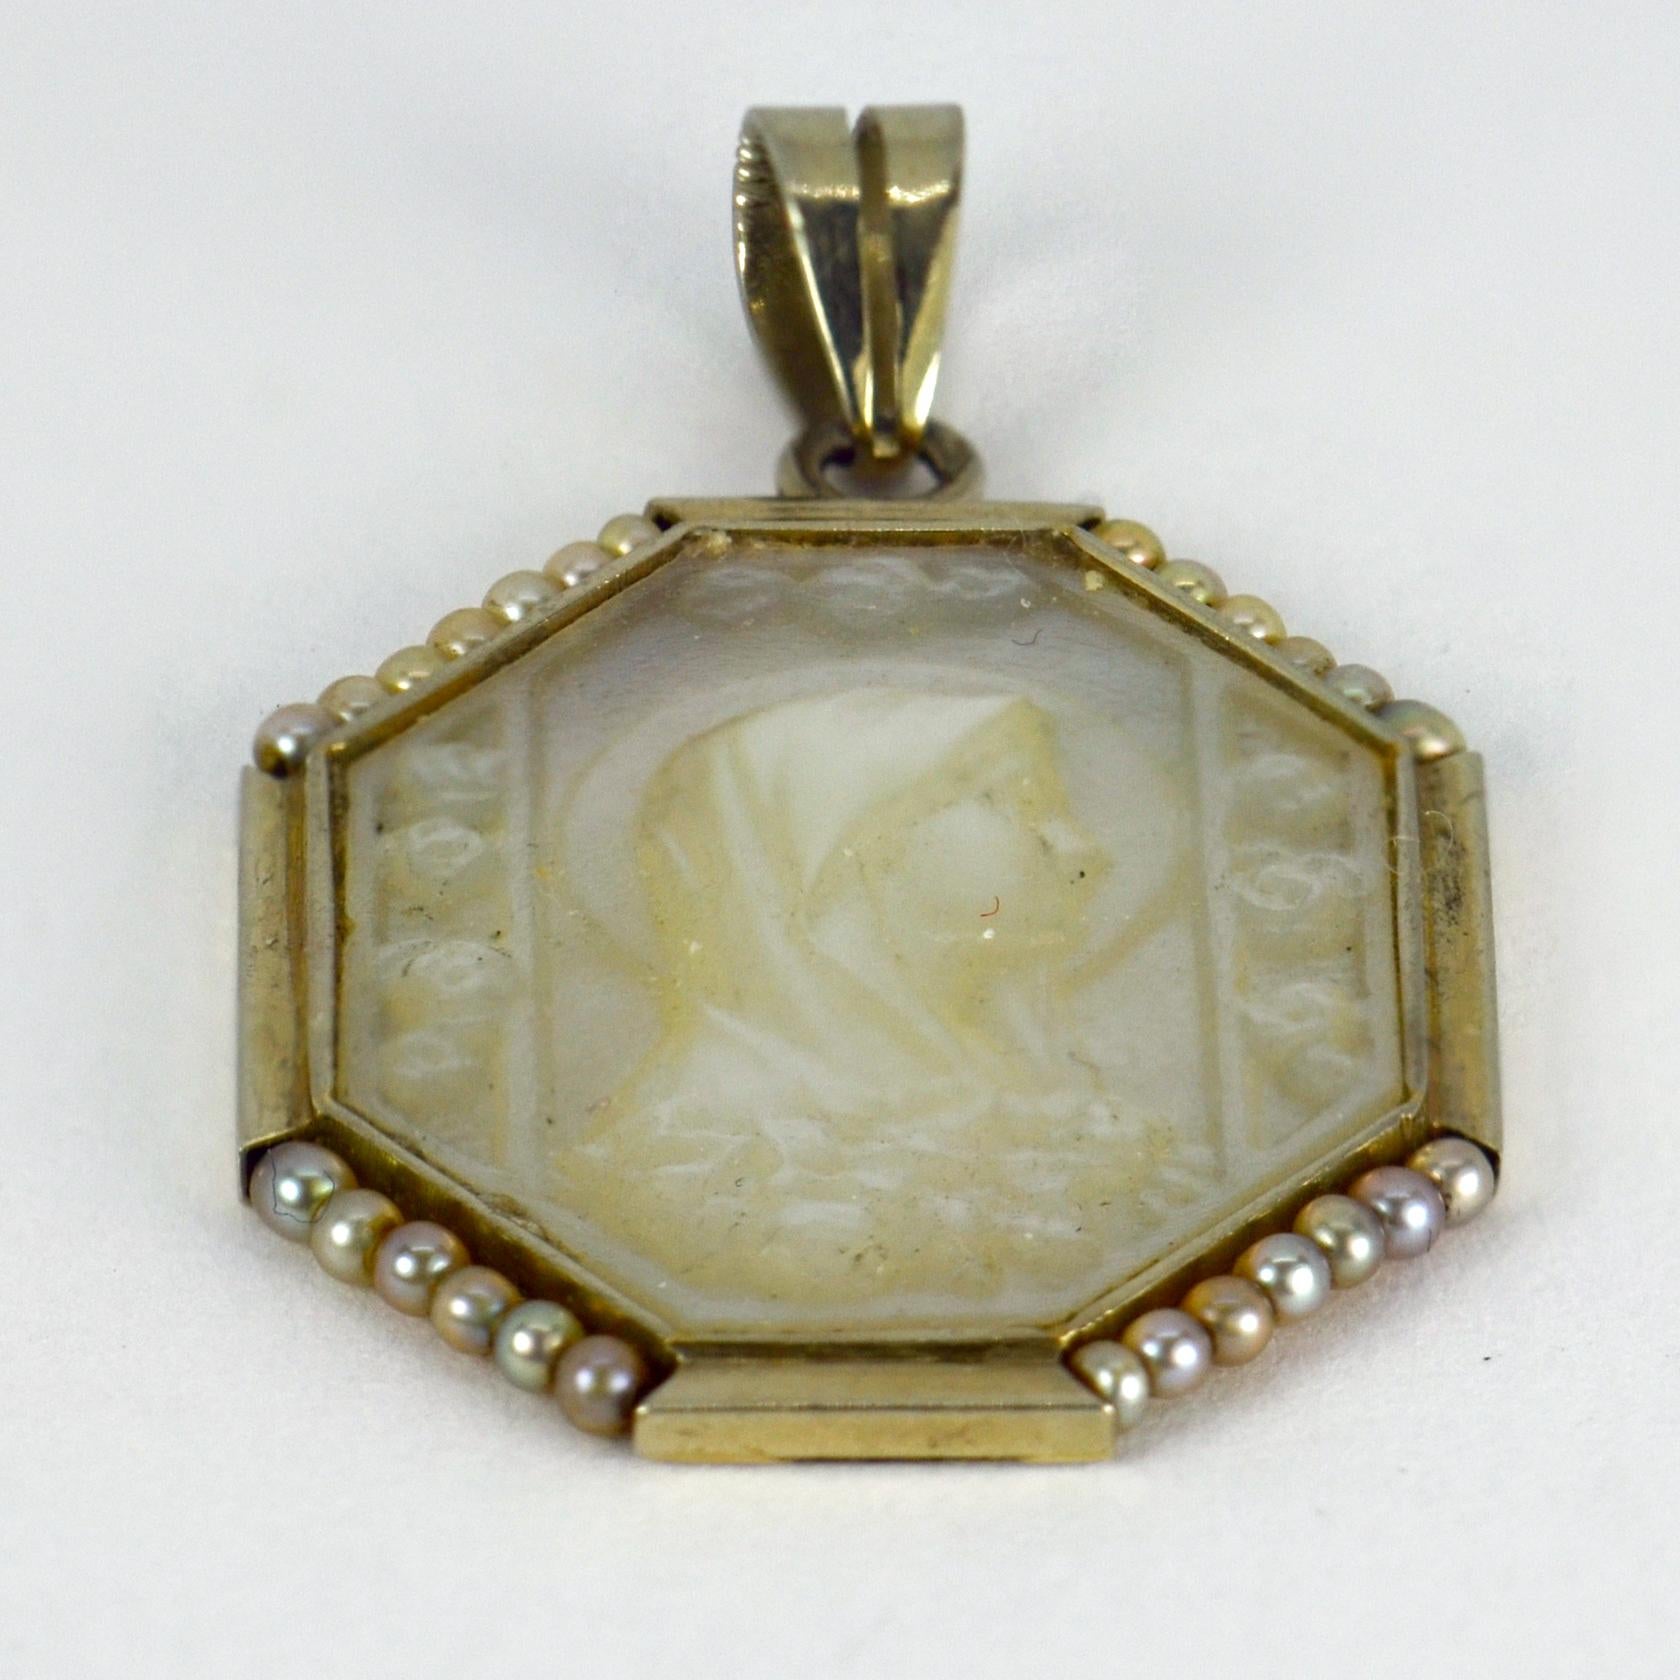 A French 18 karat (18K) white gold Art Deco pendant set with a large mother of pearl tablet engraved with a cameo of the Virgin Mary among flowers, surrounded by 24 natural grey seed pearls. Stamped with the French eagle’s head for 18 karat gold and